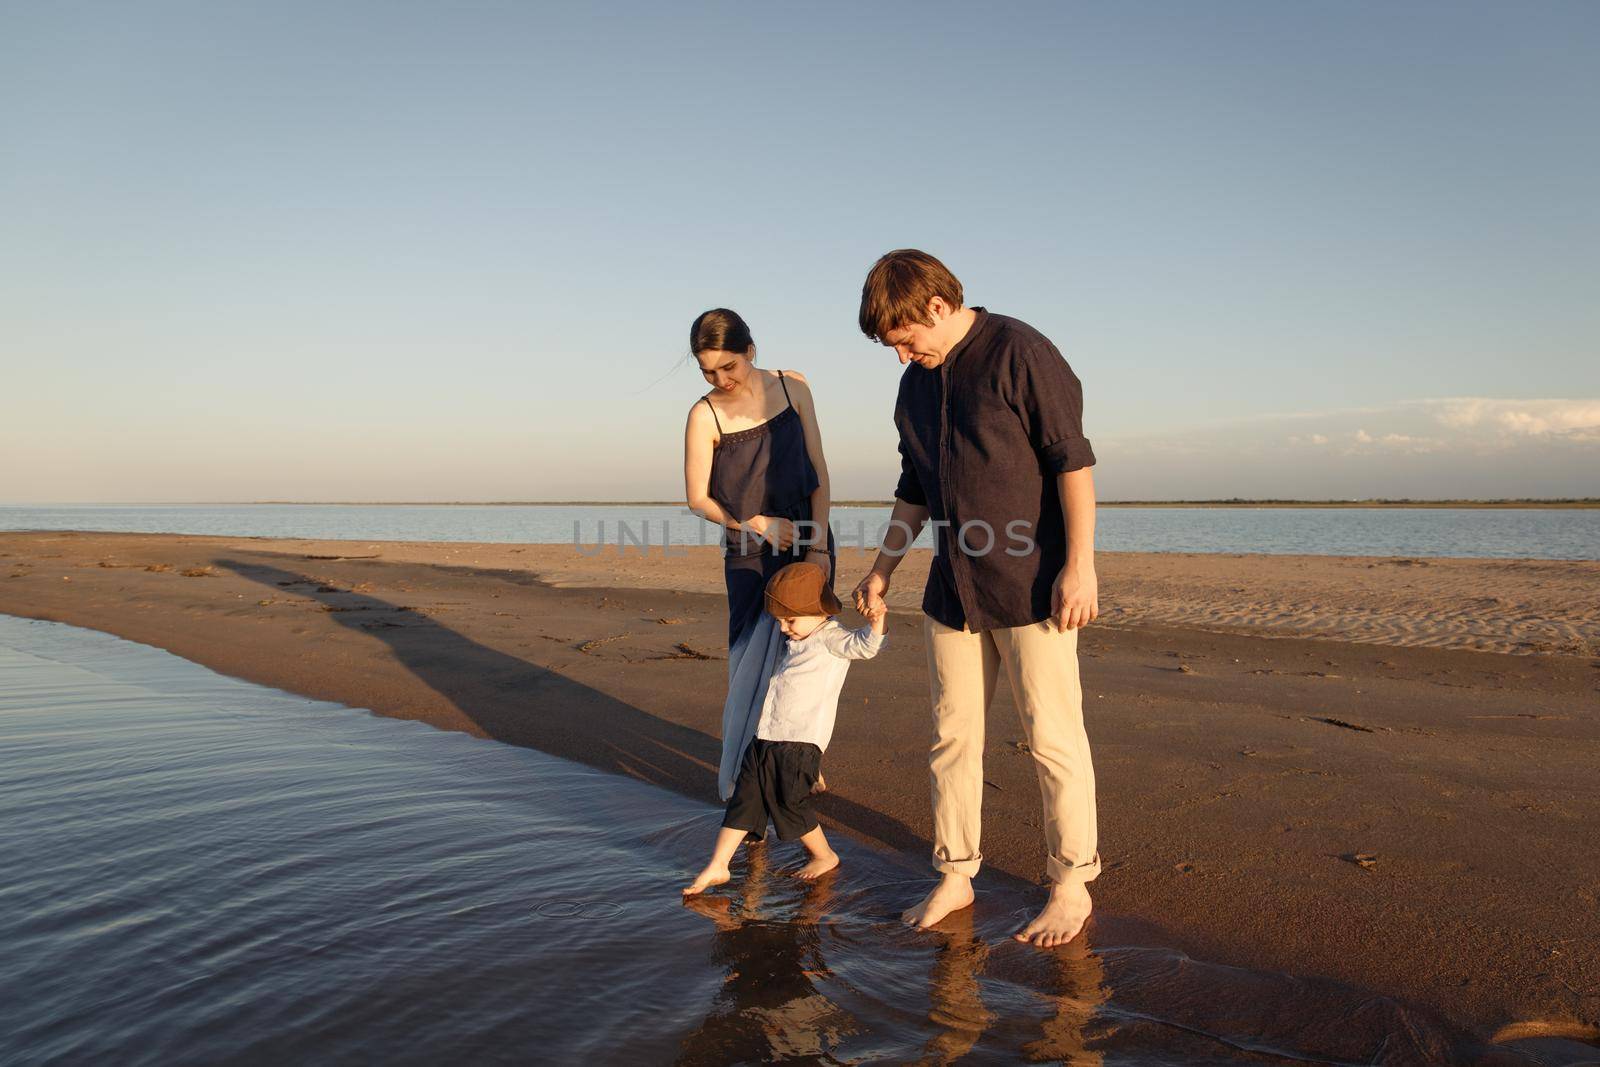 A young family with a three year old son walks barefoot along the wild evening beach.